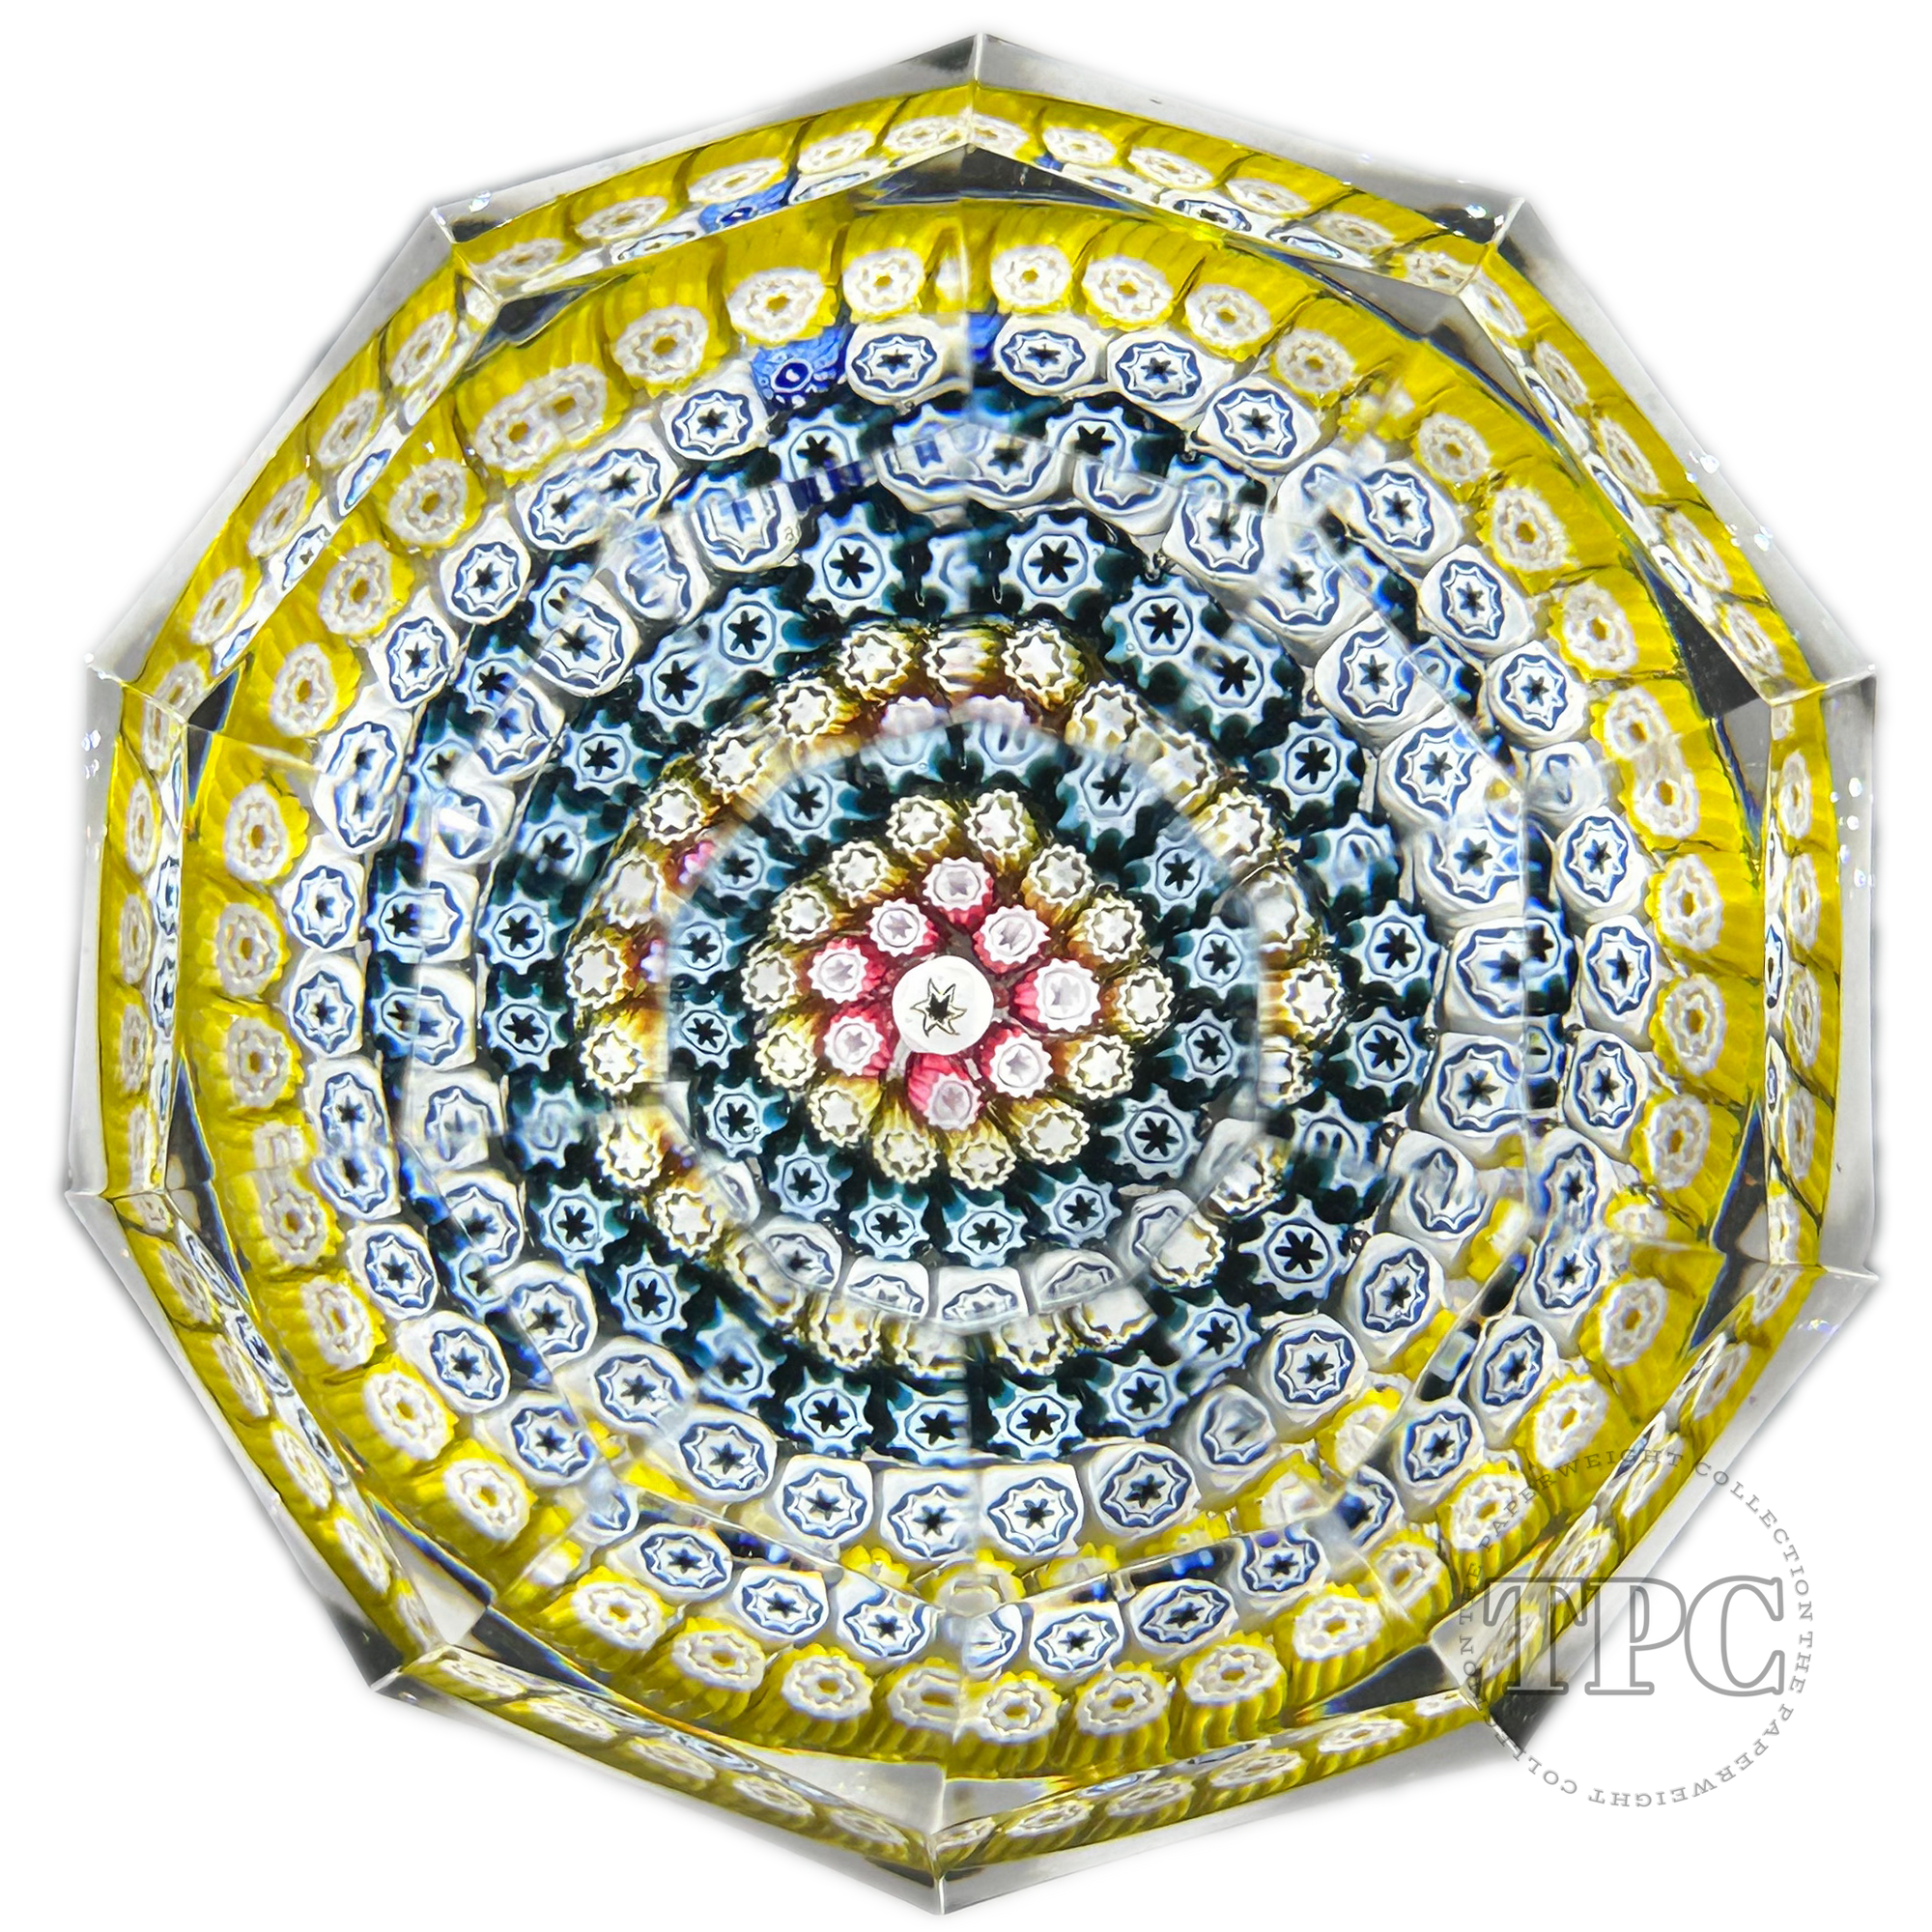 Whitefriars 1976 Brick Faceted Glass Art Paperweight with Colorful Concentric Millefiori